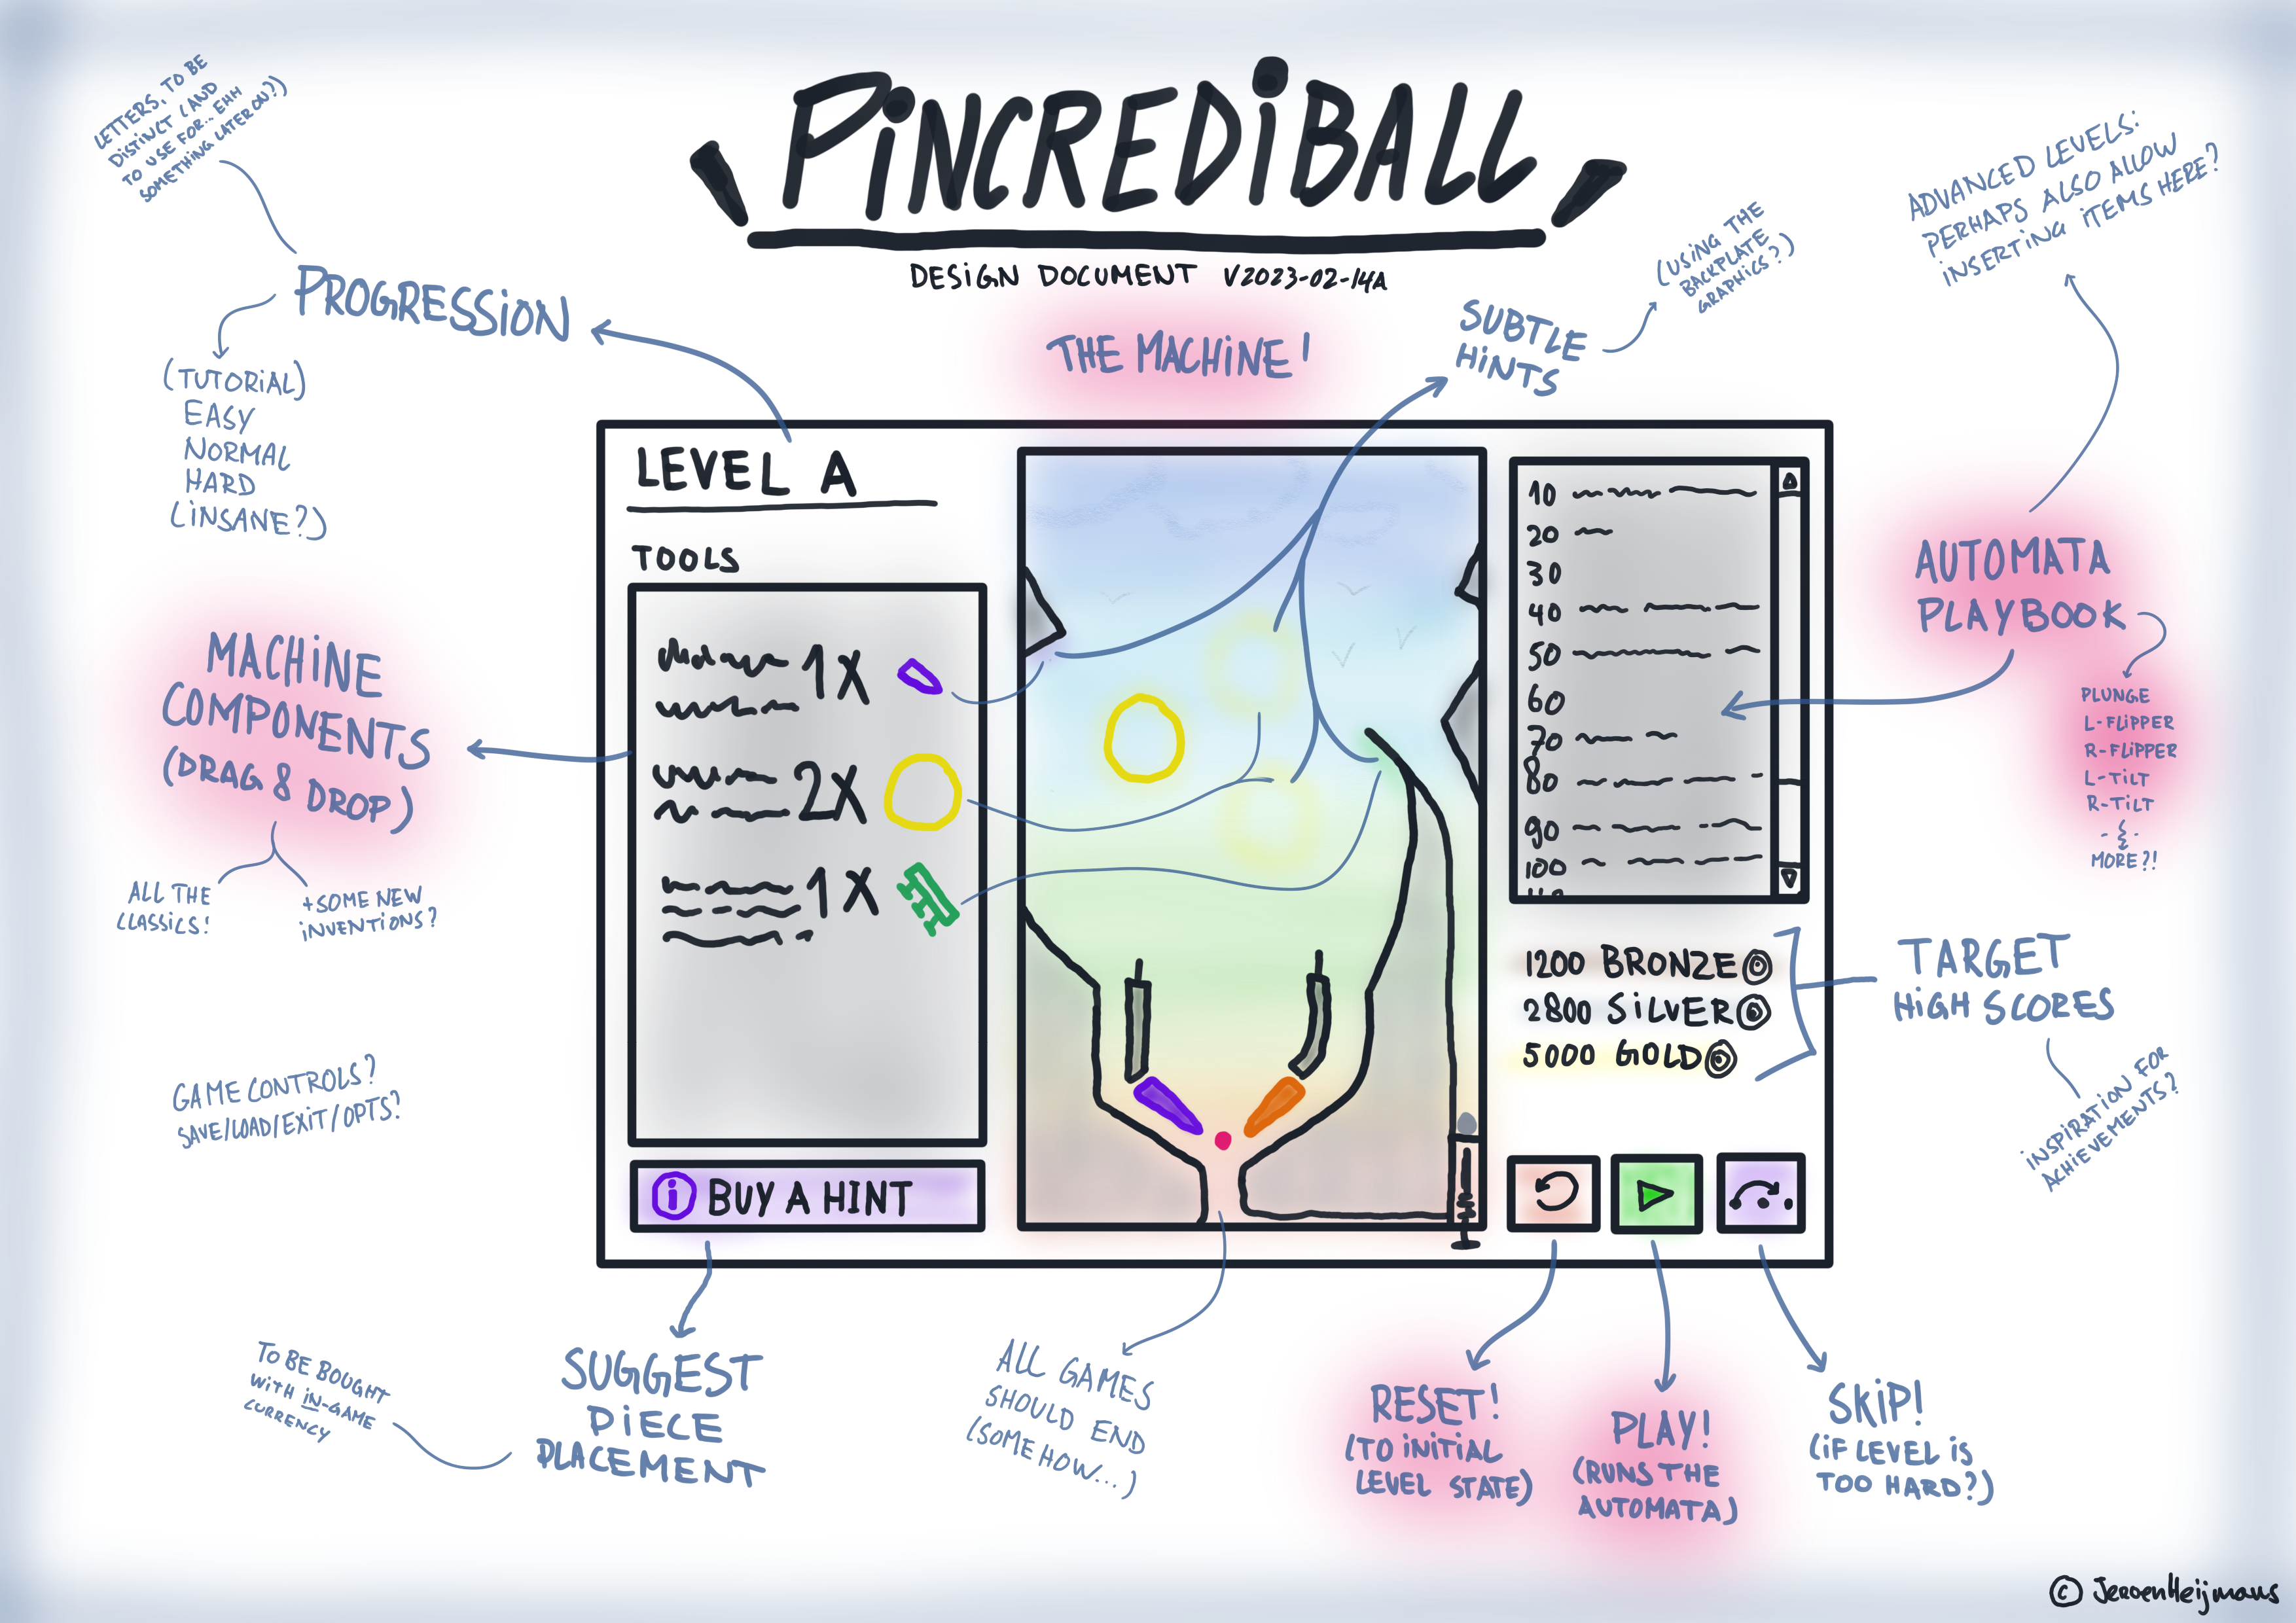 Design overview of 'Pincrediball' showing the game screen with annotations